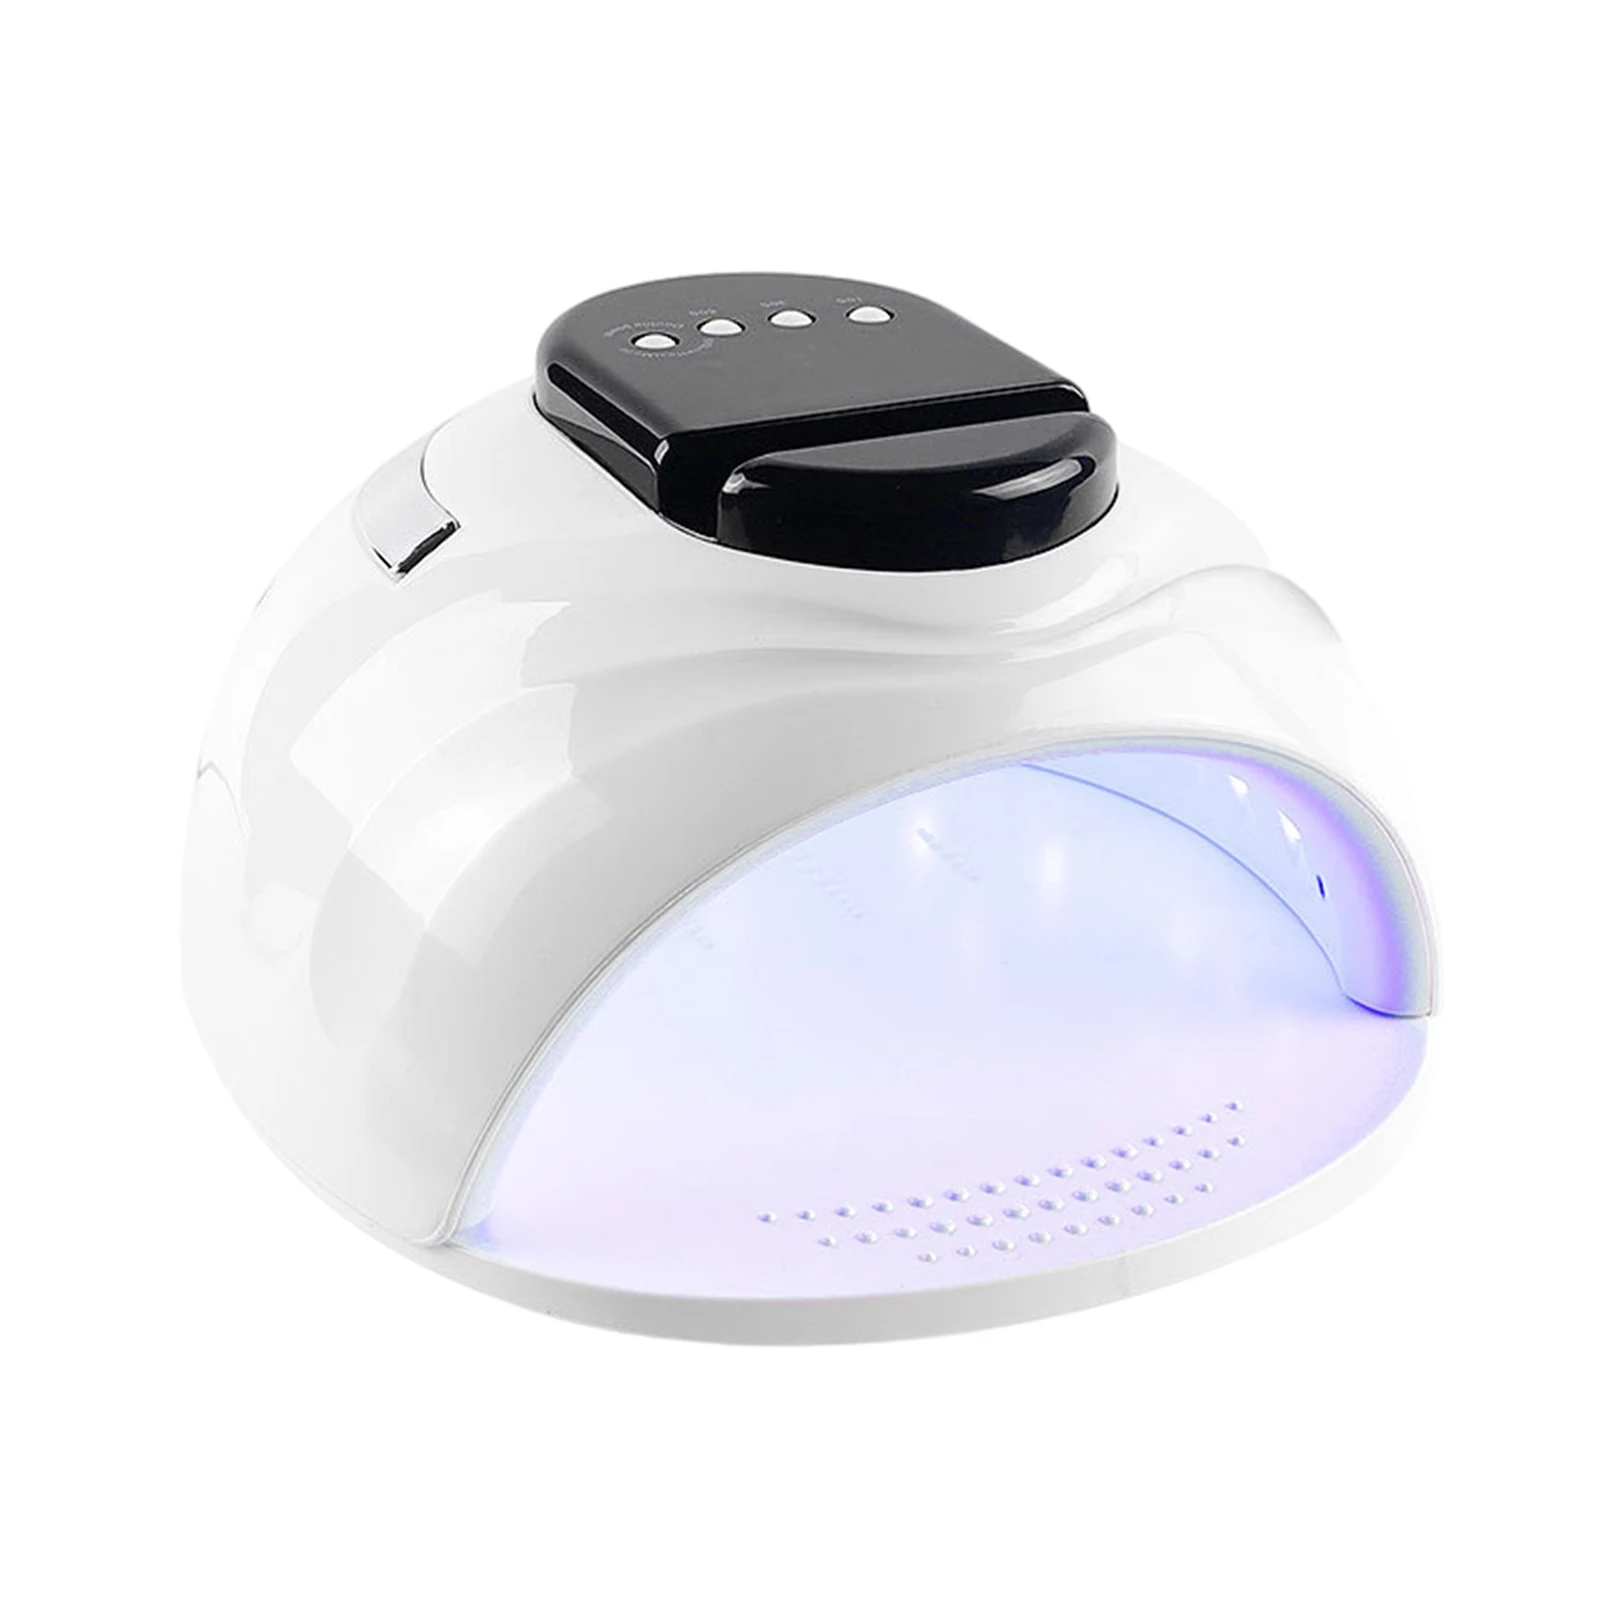 Nail Polish Dryer Nail Polish Curing Lamp LED Display Lamp Gel Acrylic Curing Light for Home Salon Manicure Pedicure